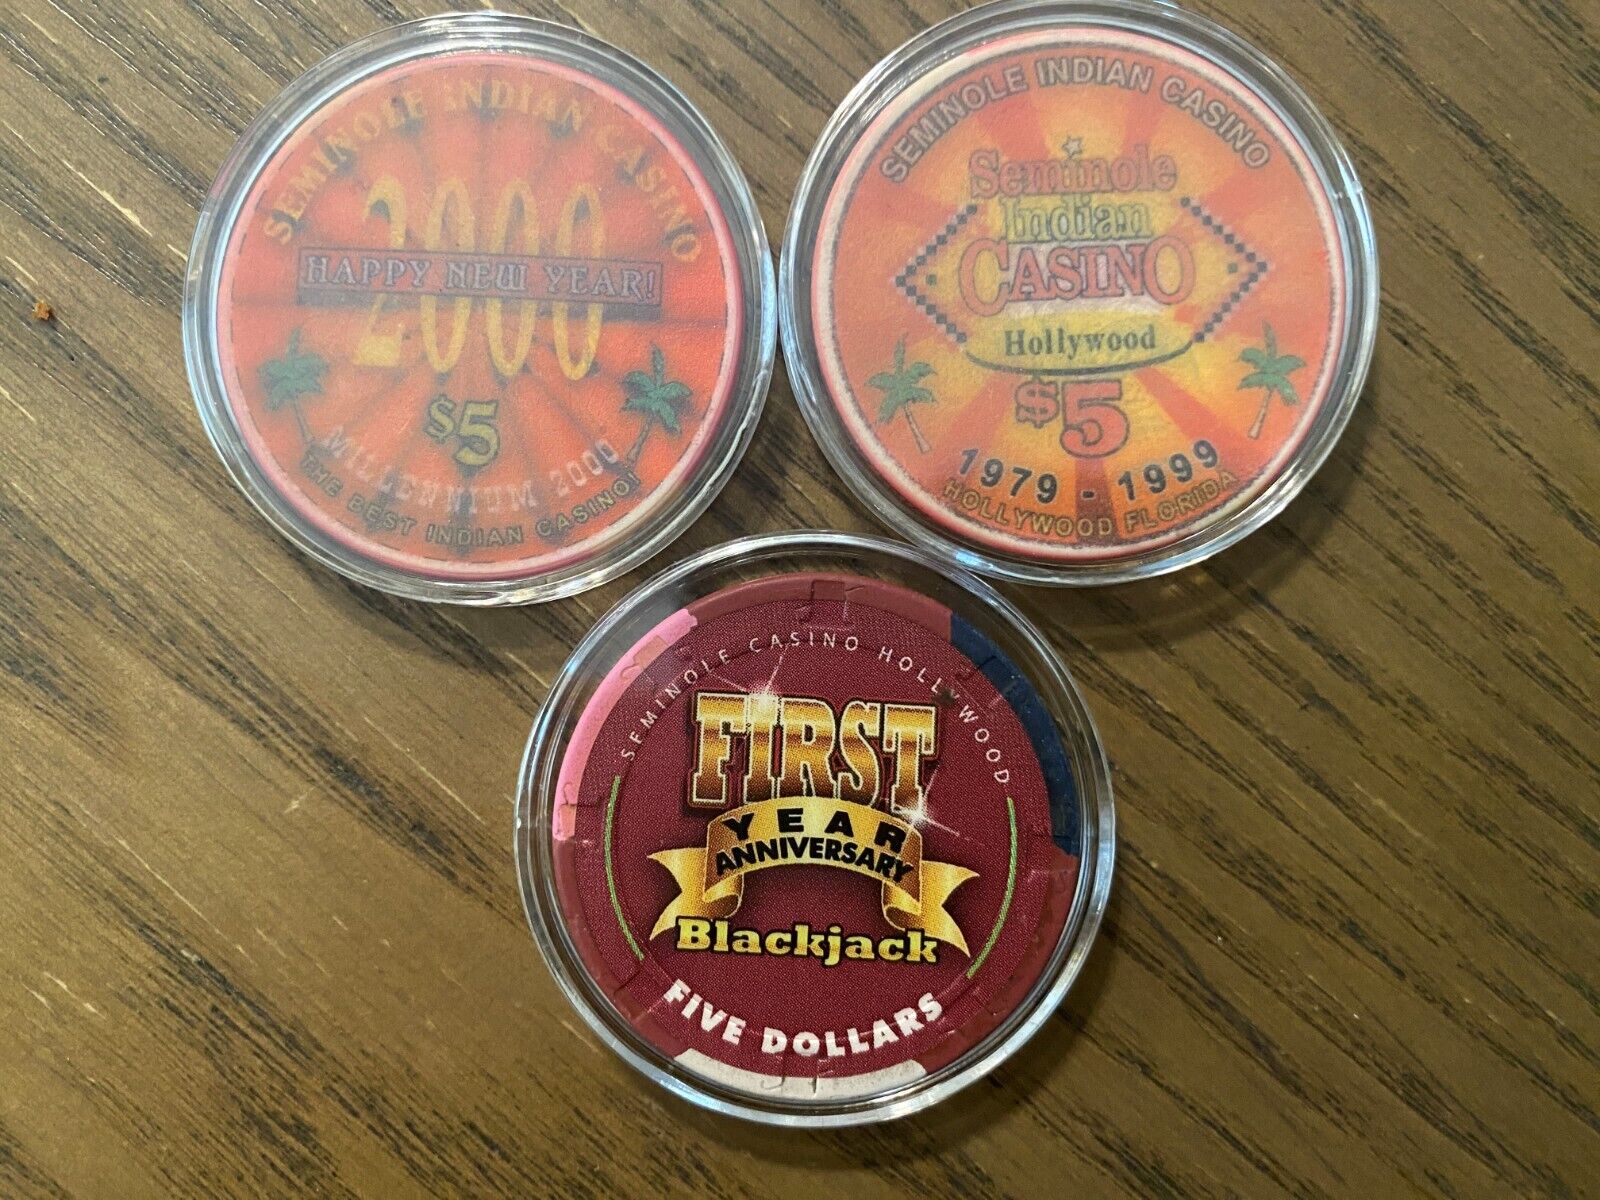 Lot of 3 $5 Chips from Seminole Casino in Hollywood, FL